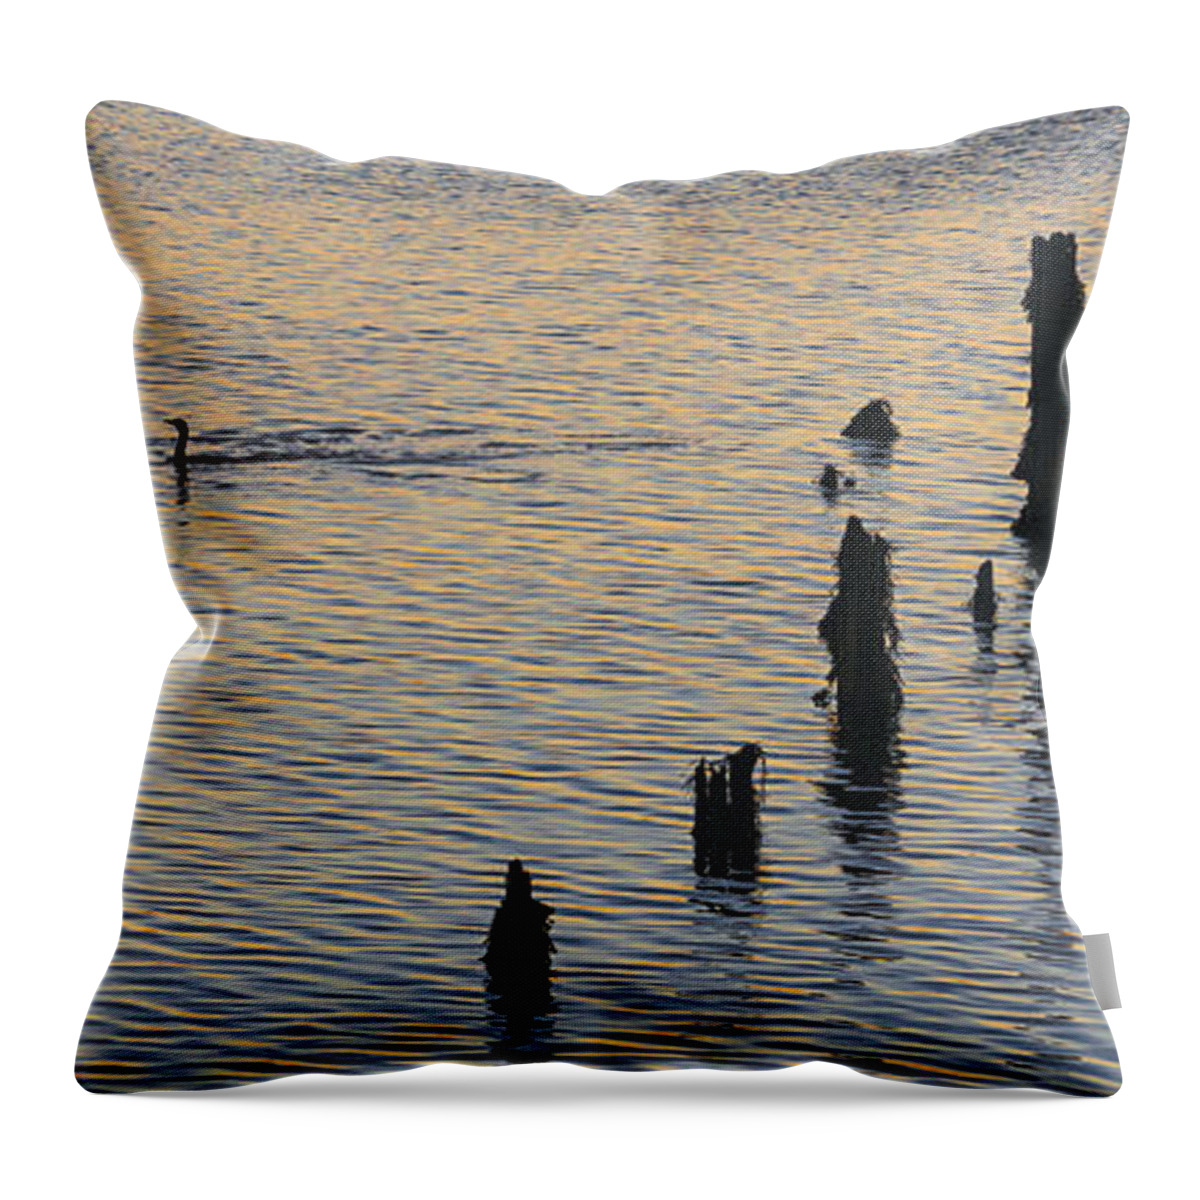 Cormorants Throw Pillow featuring the photograph Three Cormorants by Marty Saccone